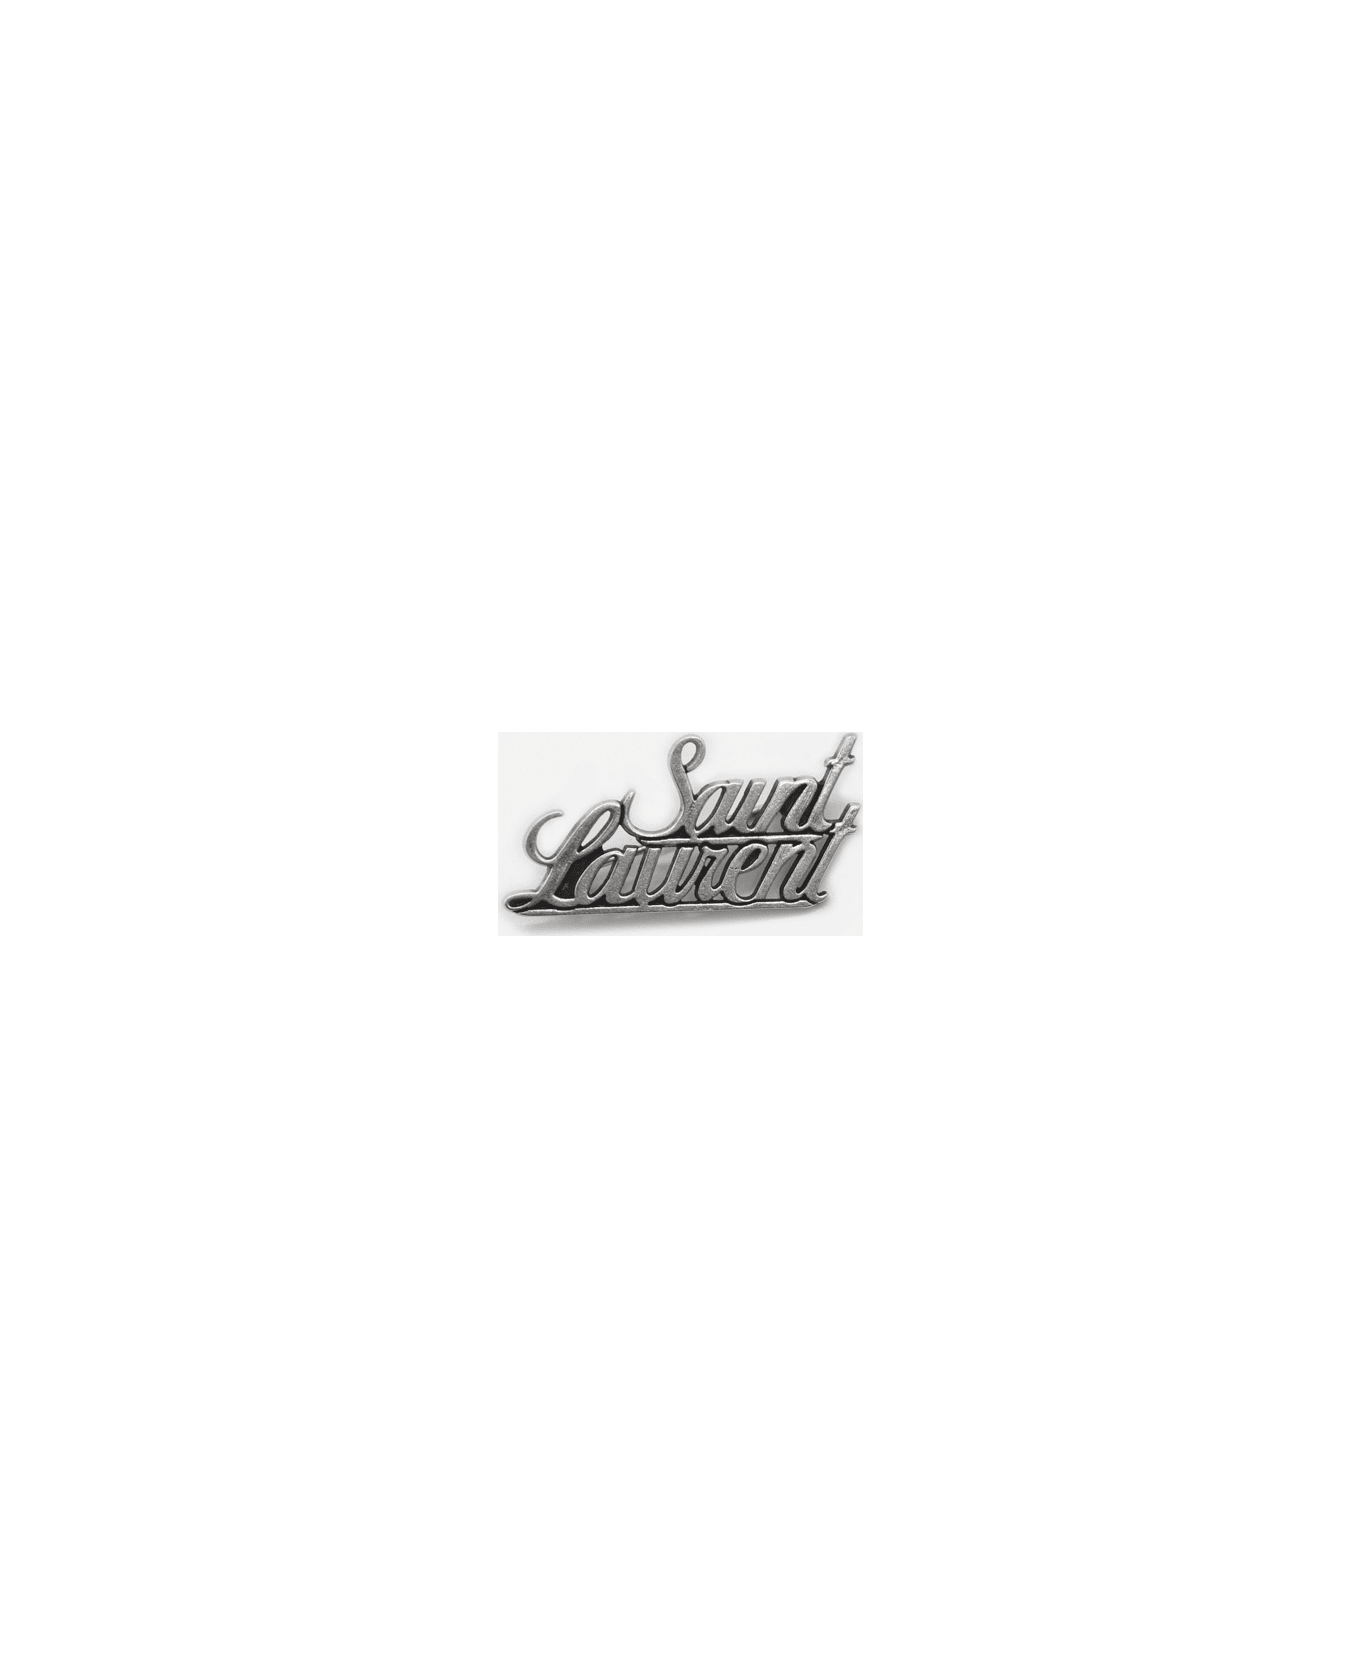 Saint Laurent Brass Brooch With Logo Lettering - Silver